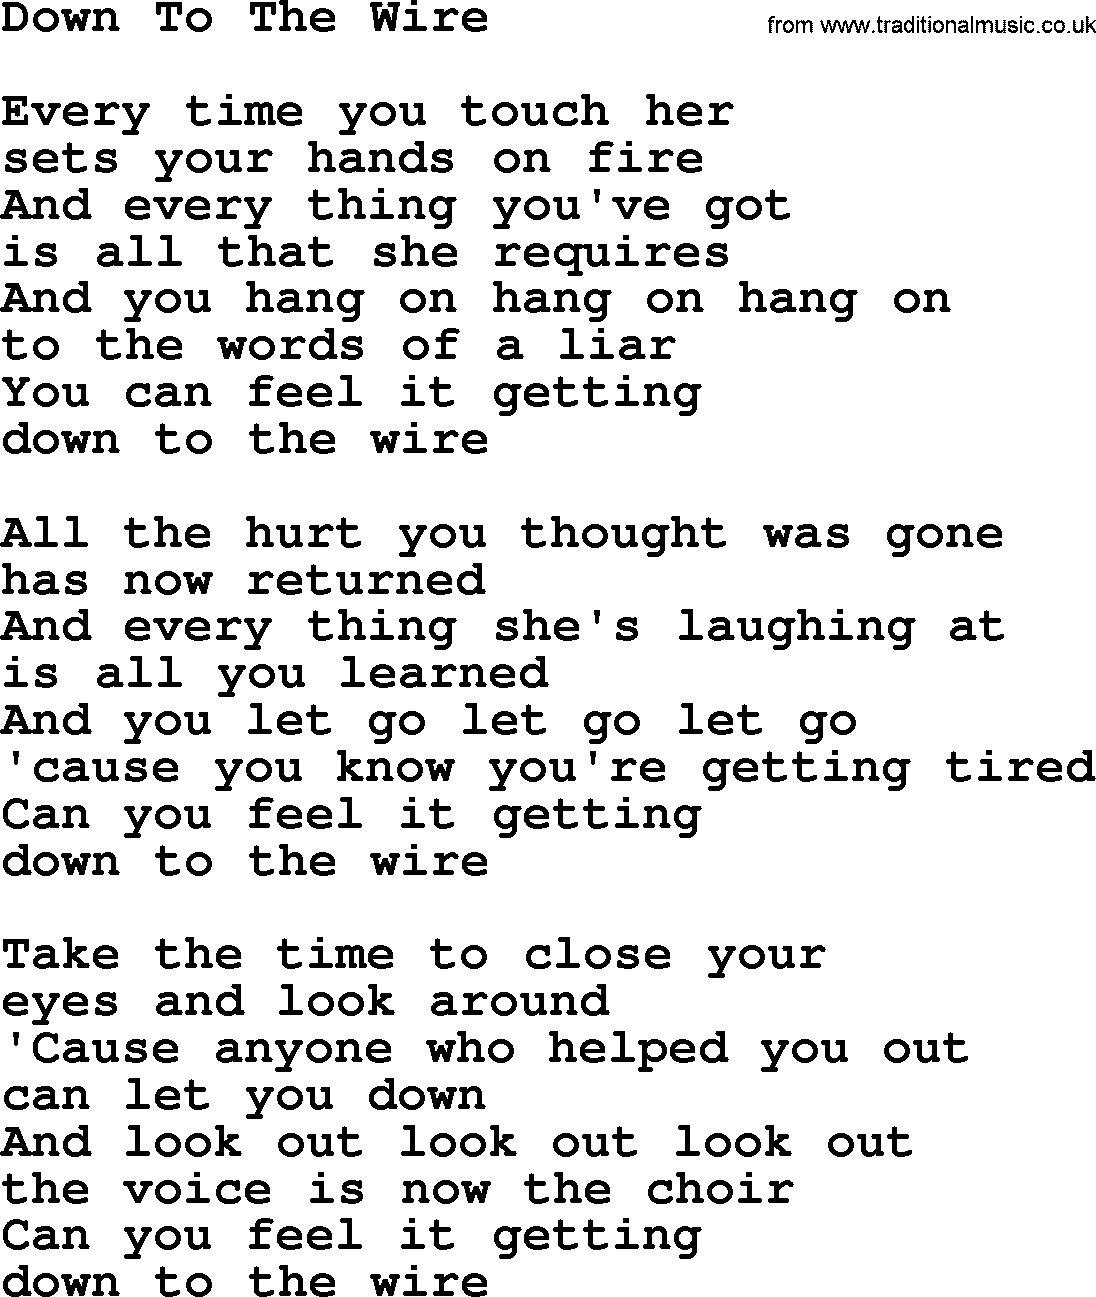 The Byrds song Down To The Wire, lyrics